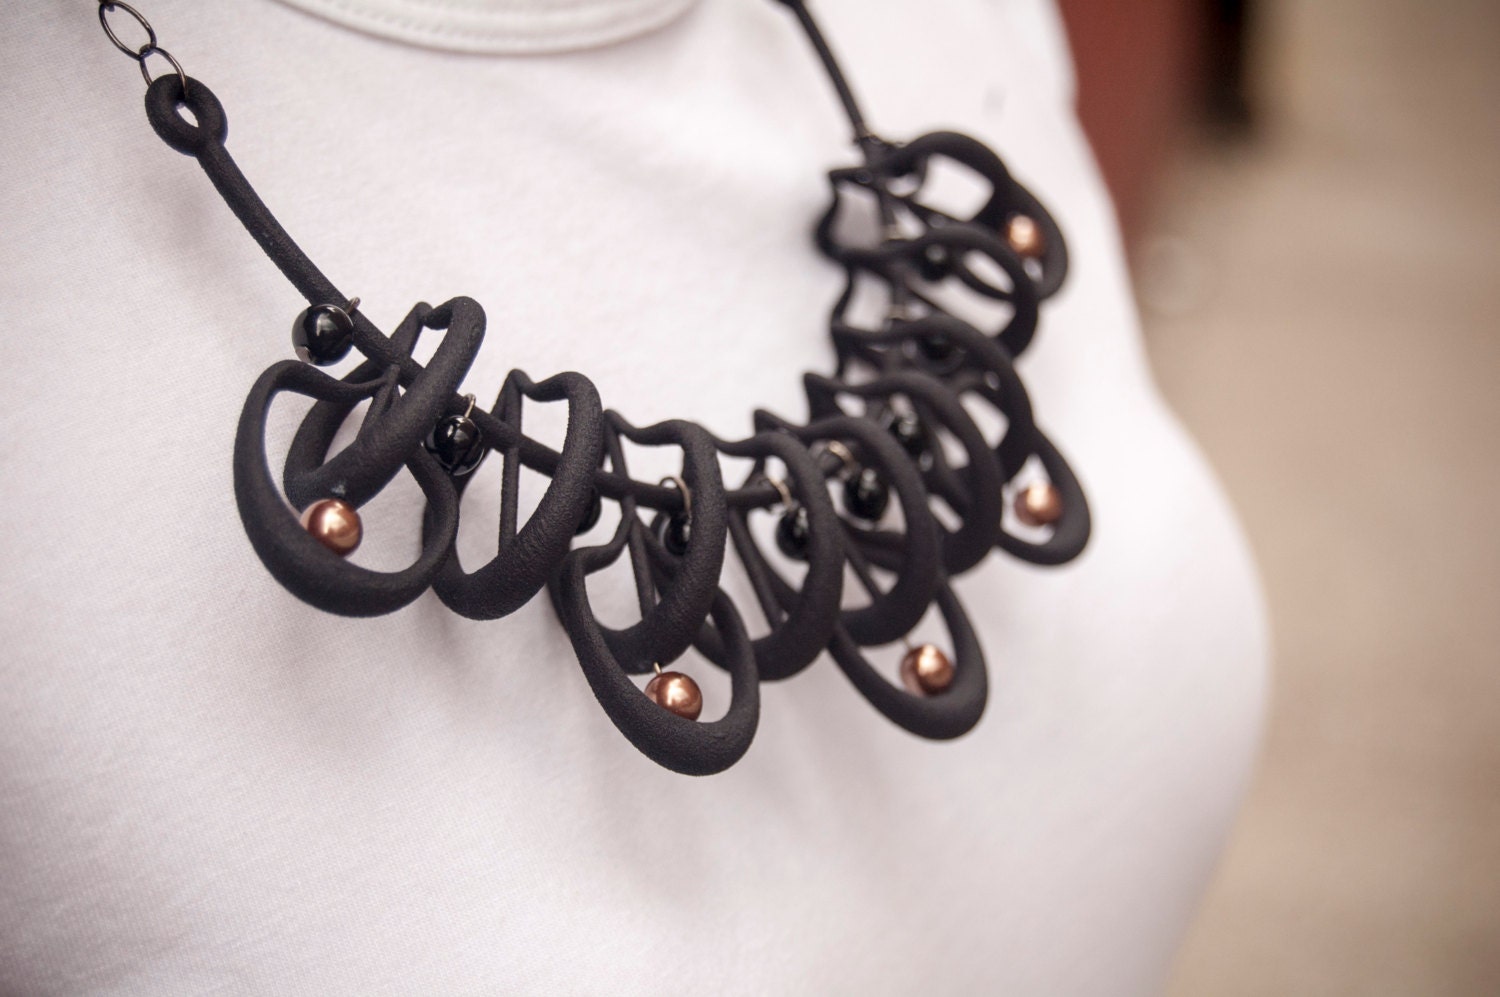 3d printed necklace template free